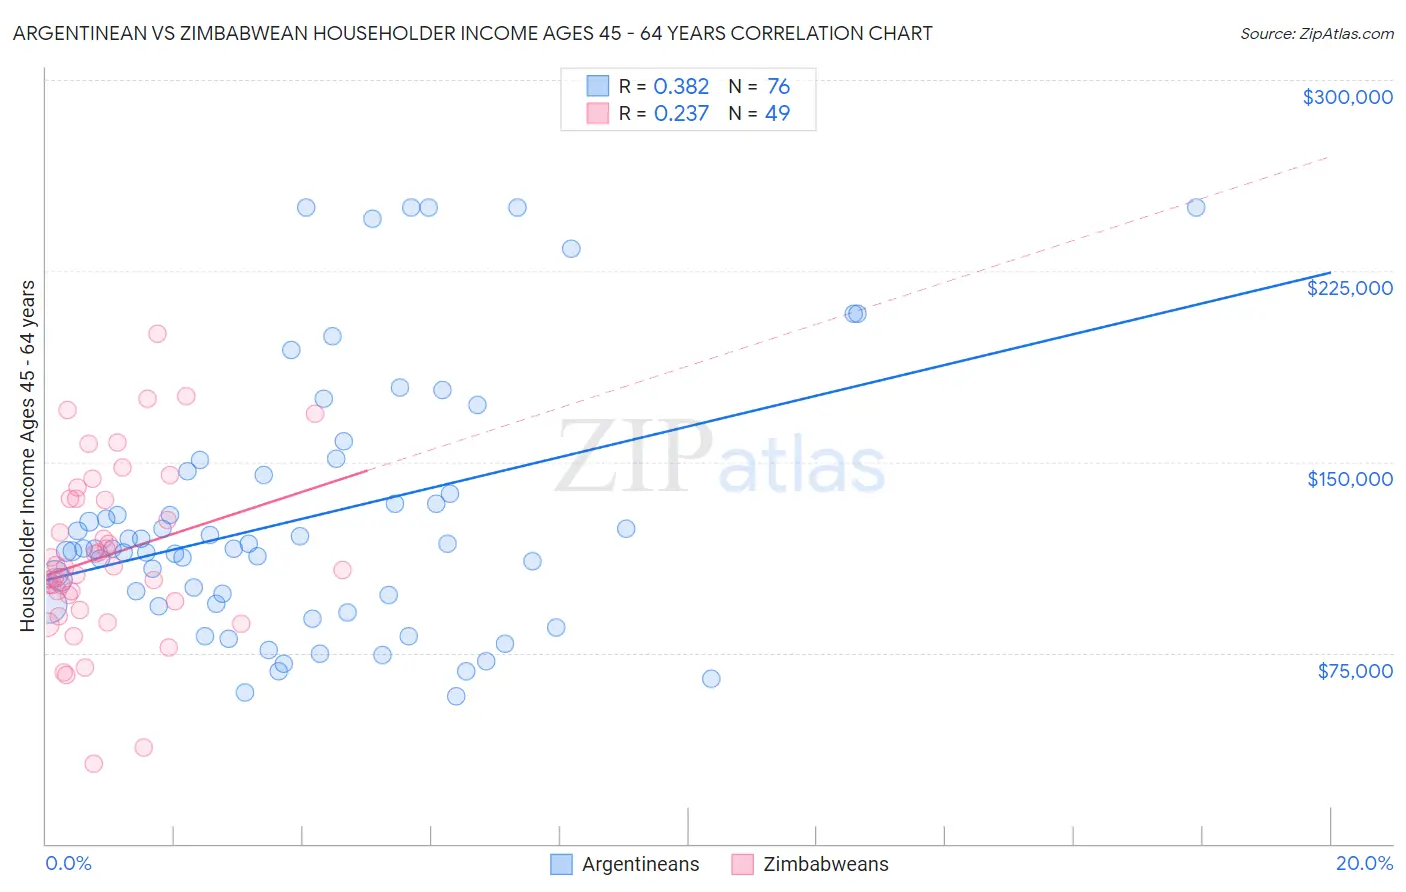 Argentinean vs Zimbabwean Householder Income Ages 45 - 64 years